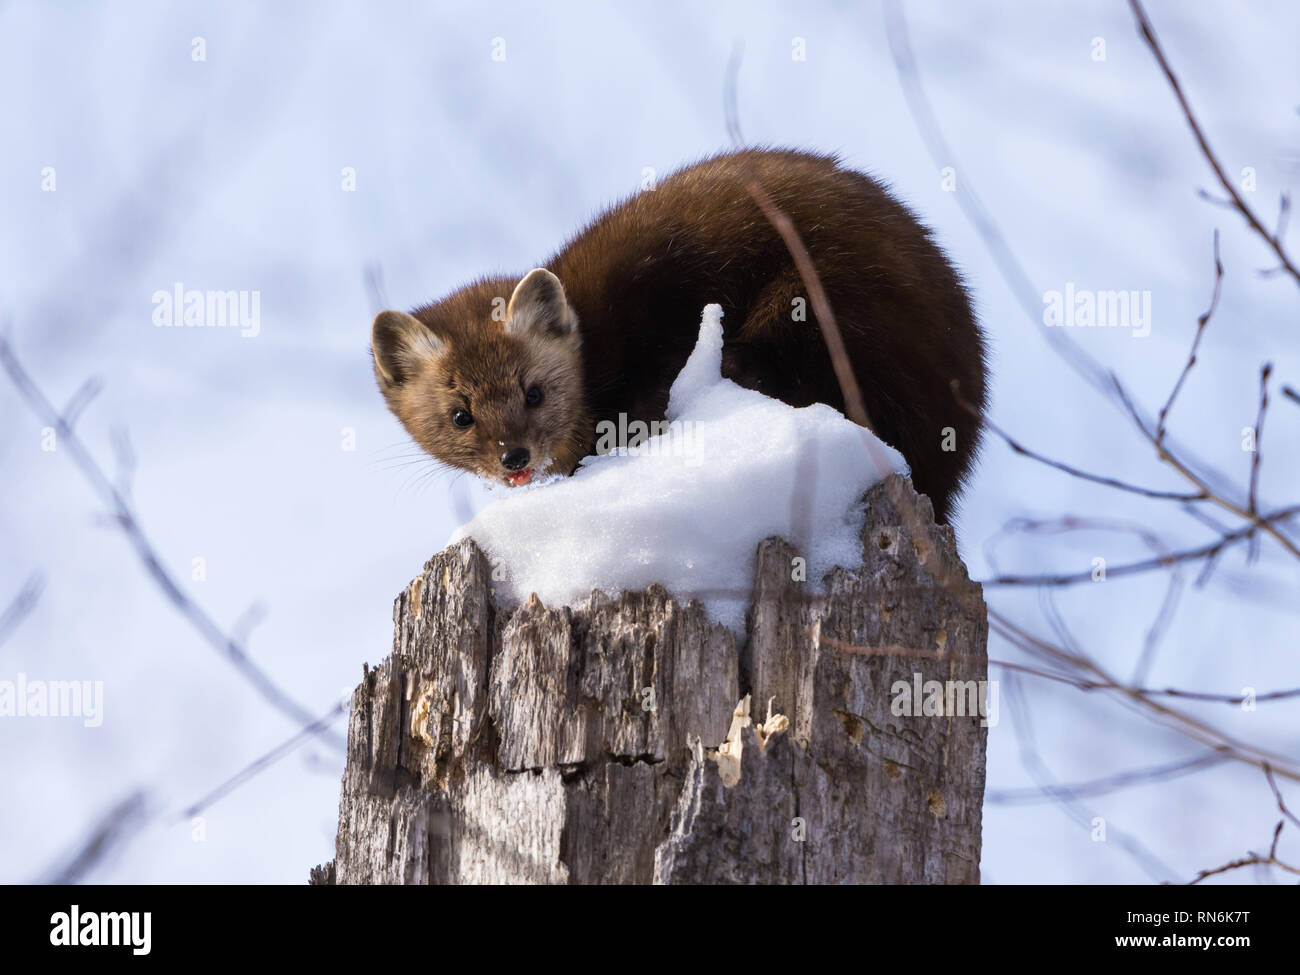 An American Pine Marten Martes Americana Sitting On Top Of Snow